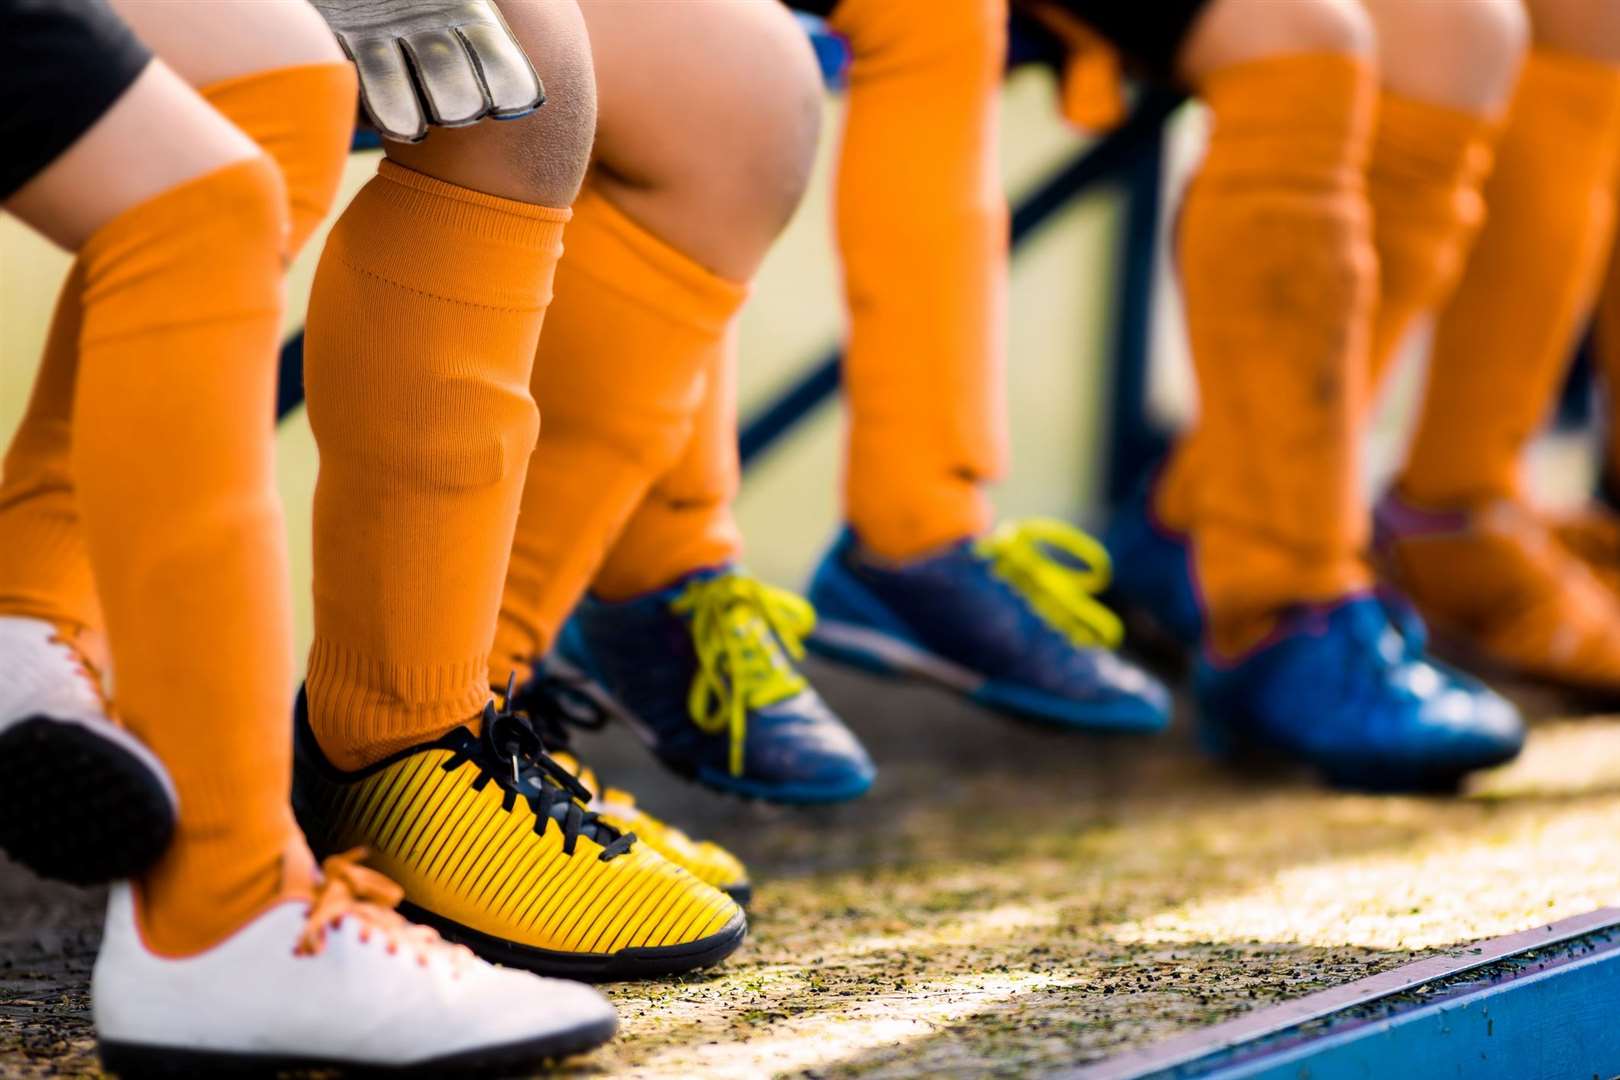 The FA is asking players to make sure their shins are properly covererd with pads. Image: iStock.